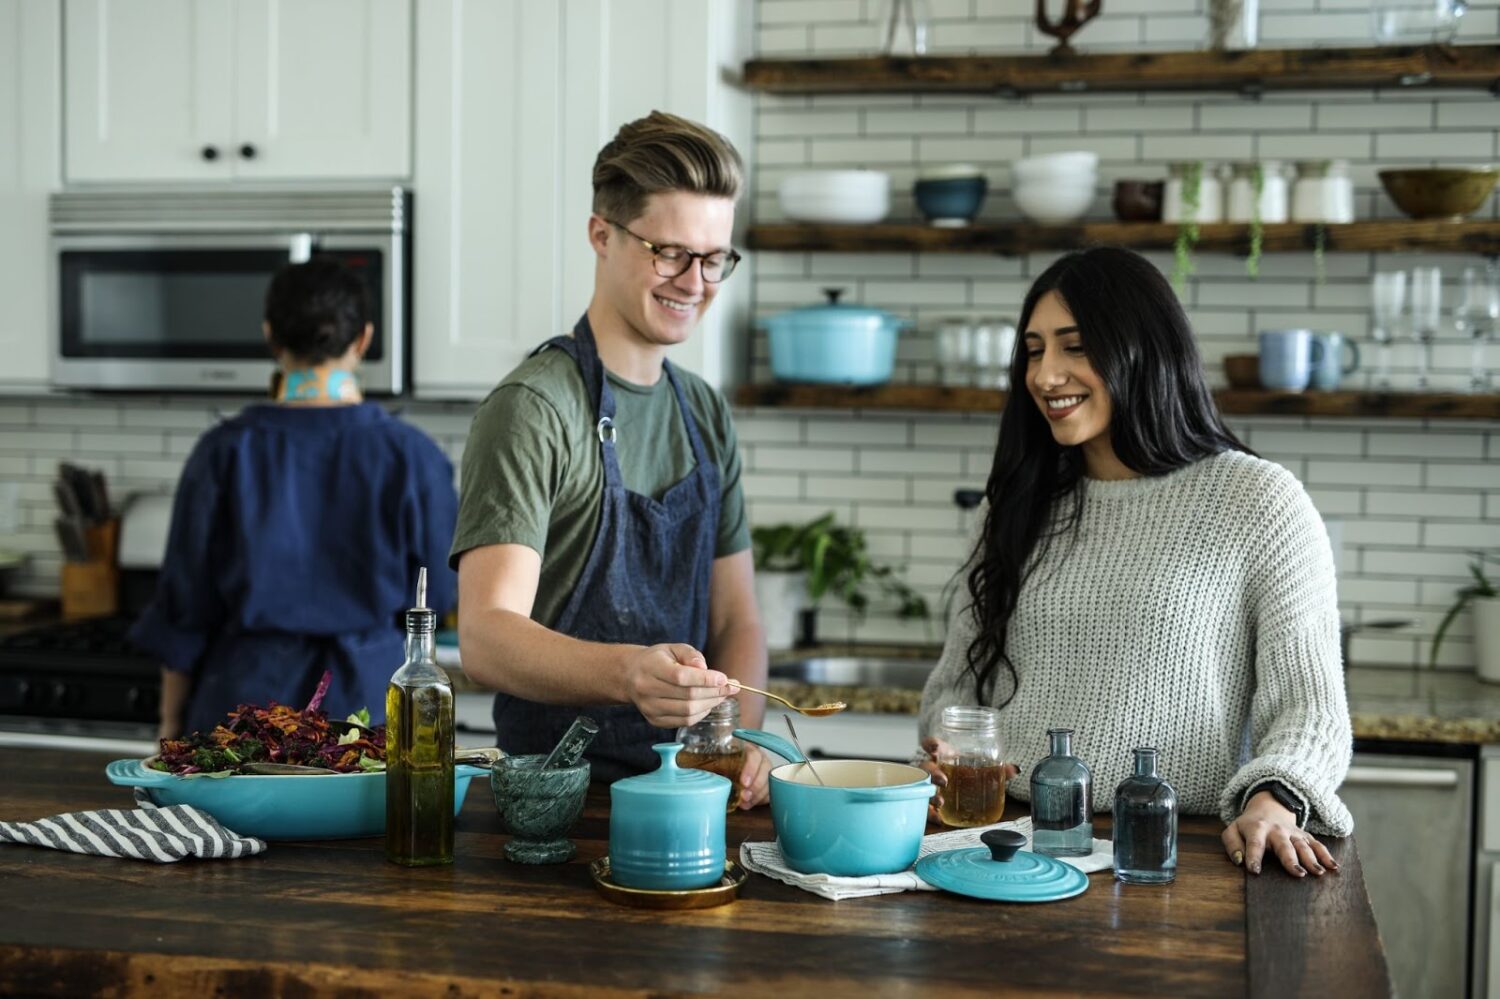 Home-Based Business – 5 Signs It’s Time To Move Your Business Out Of The Kitchen